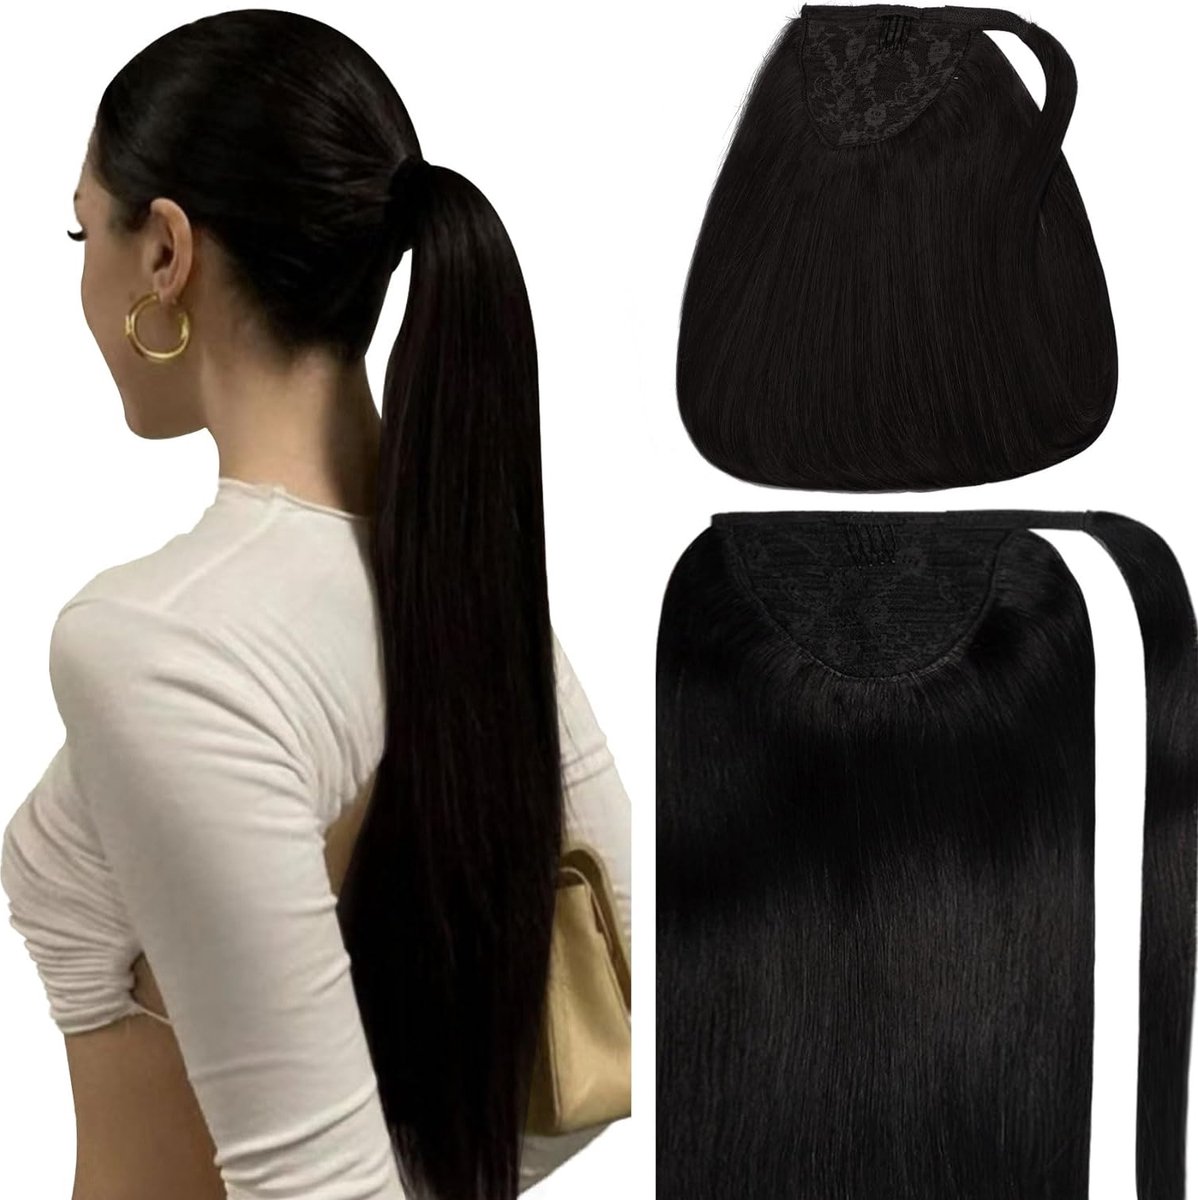 Vivendi Ponytail Clip In Hairextensions |Human Hair Echt Haar | Wrap Around Hairextensions | 16